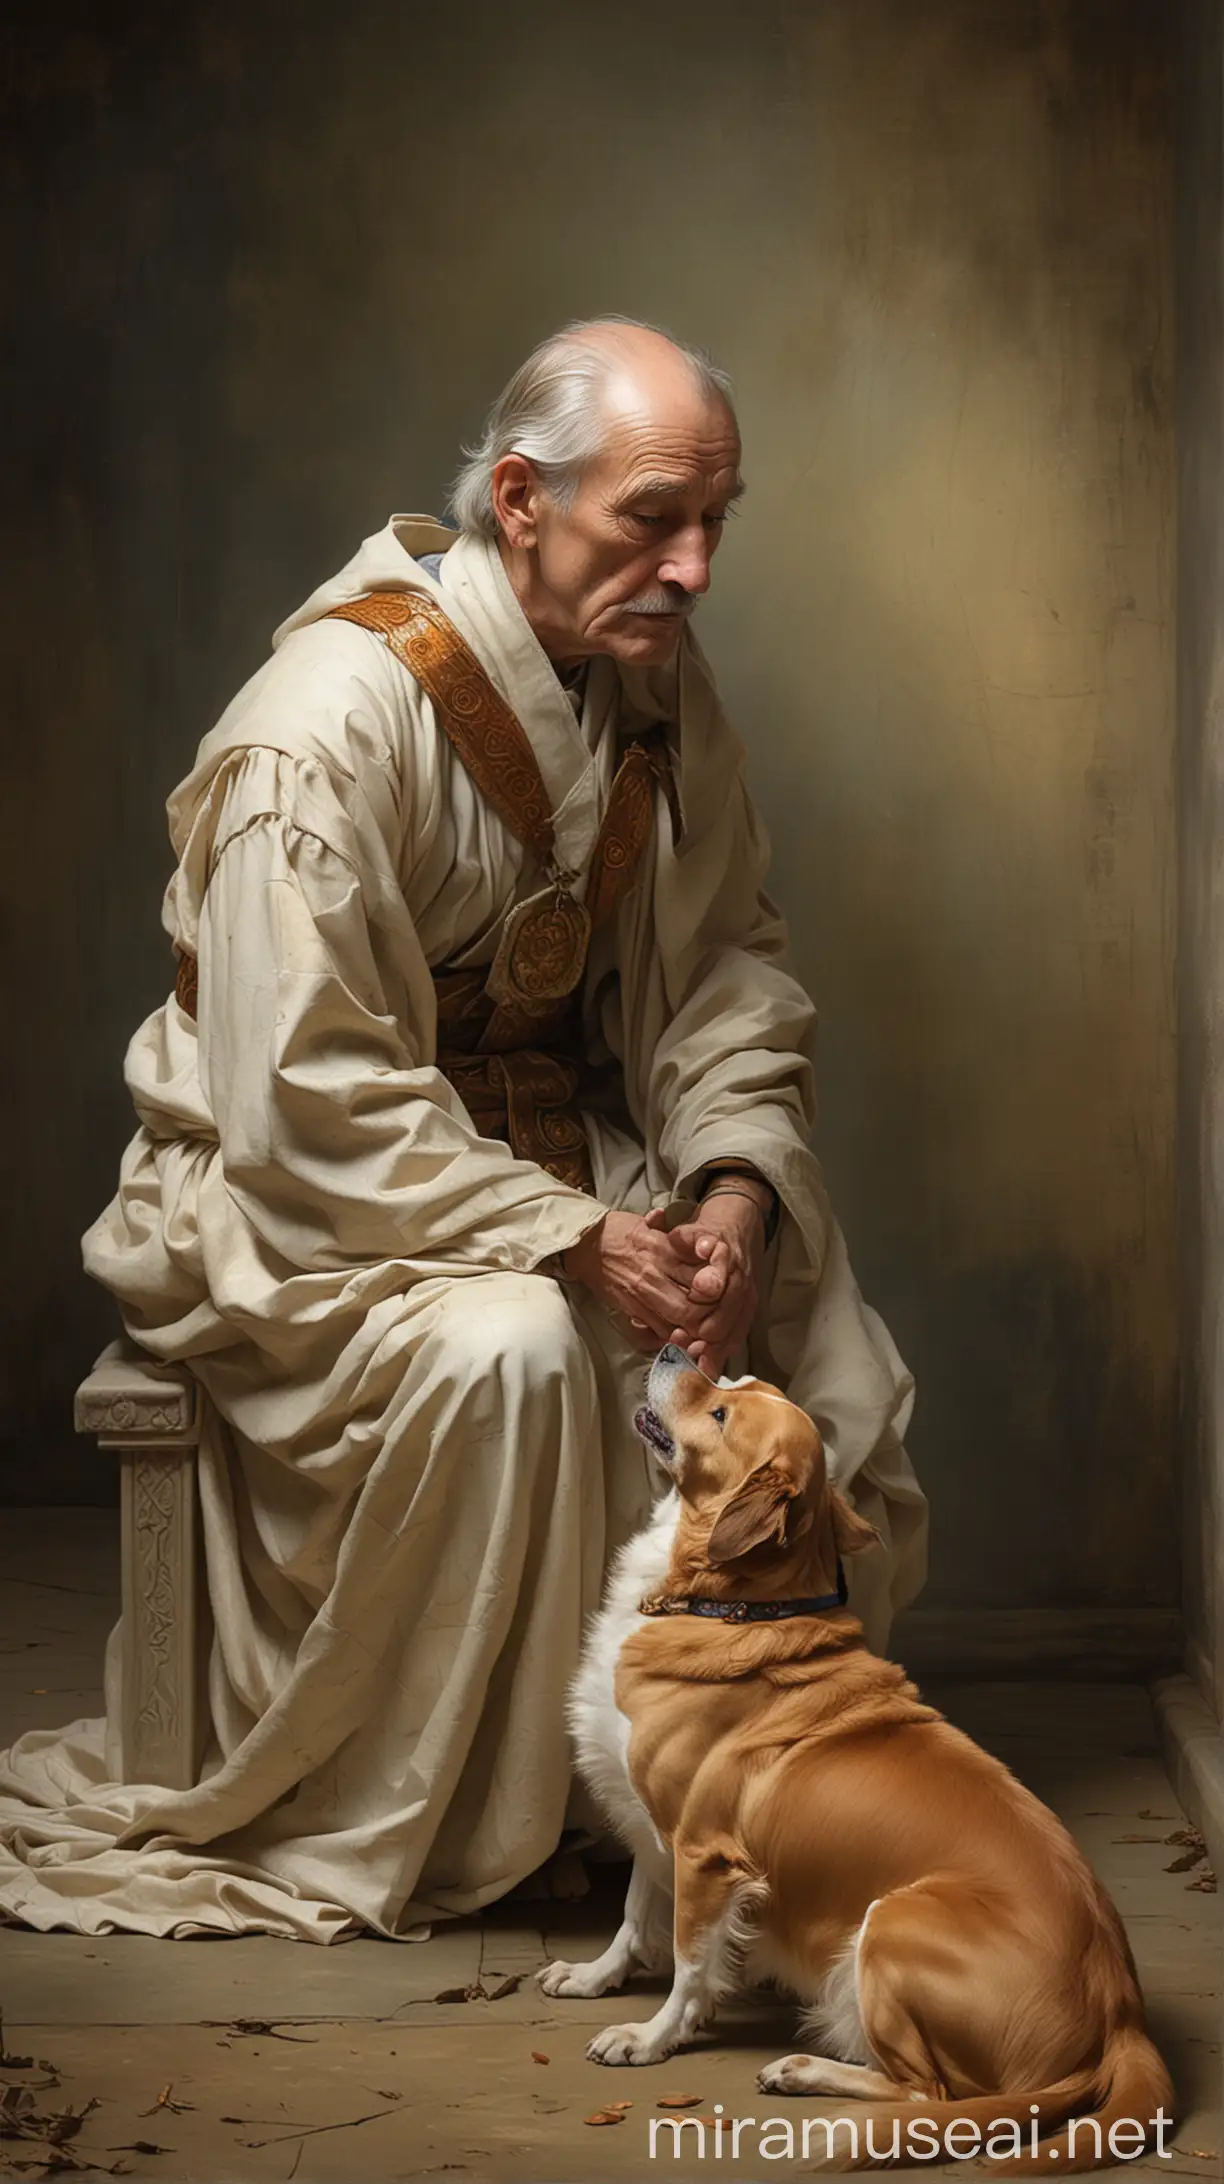 A contemplative artwork portraying the wise individual reflecting on the dog's actions, accompanied by the profound realization that overcoming internal fears is essential for achieving one's desires.




